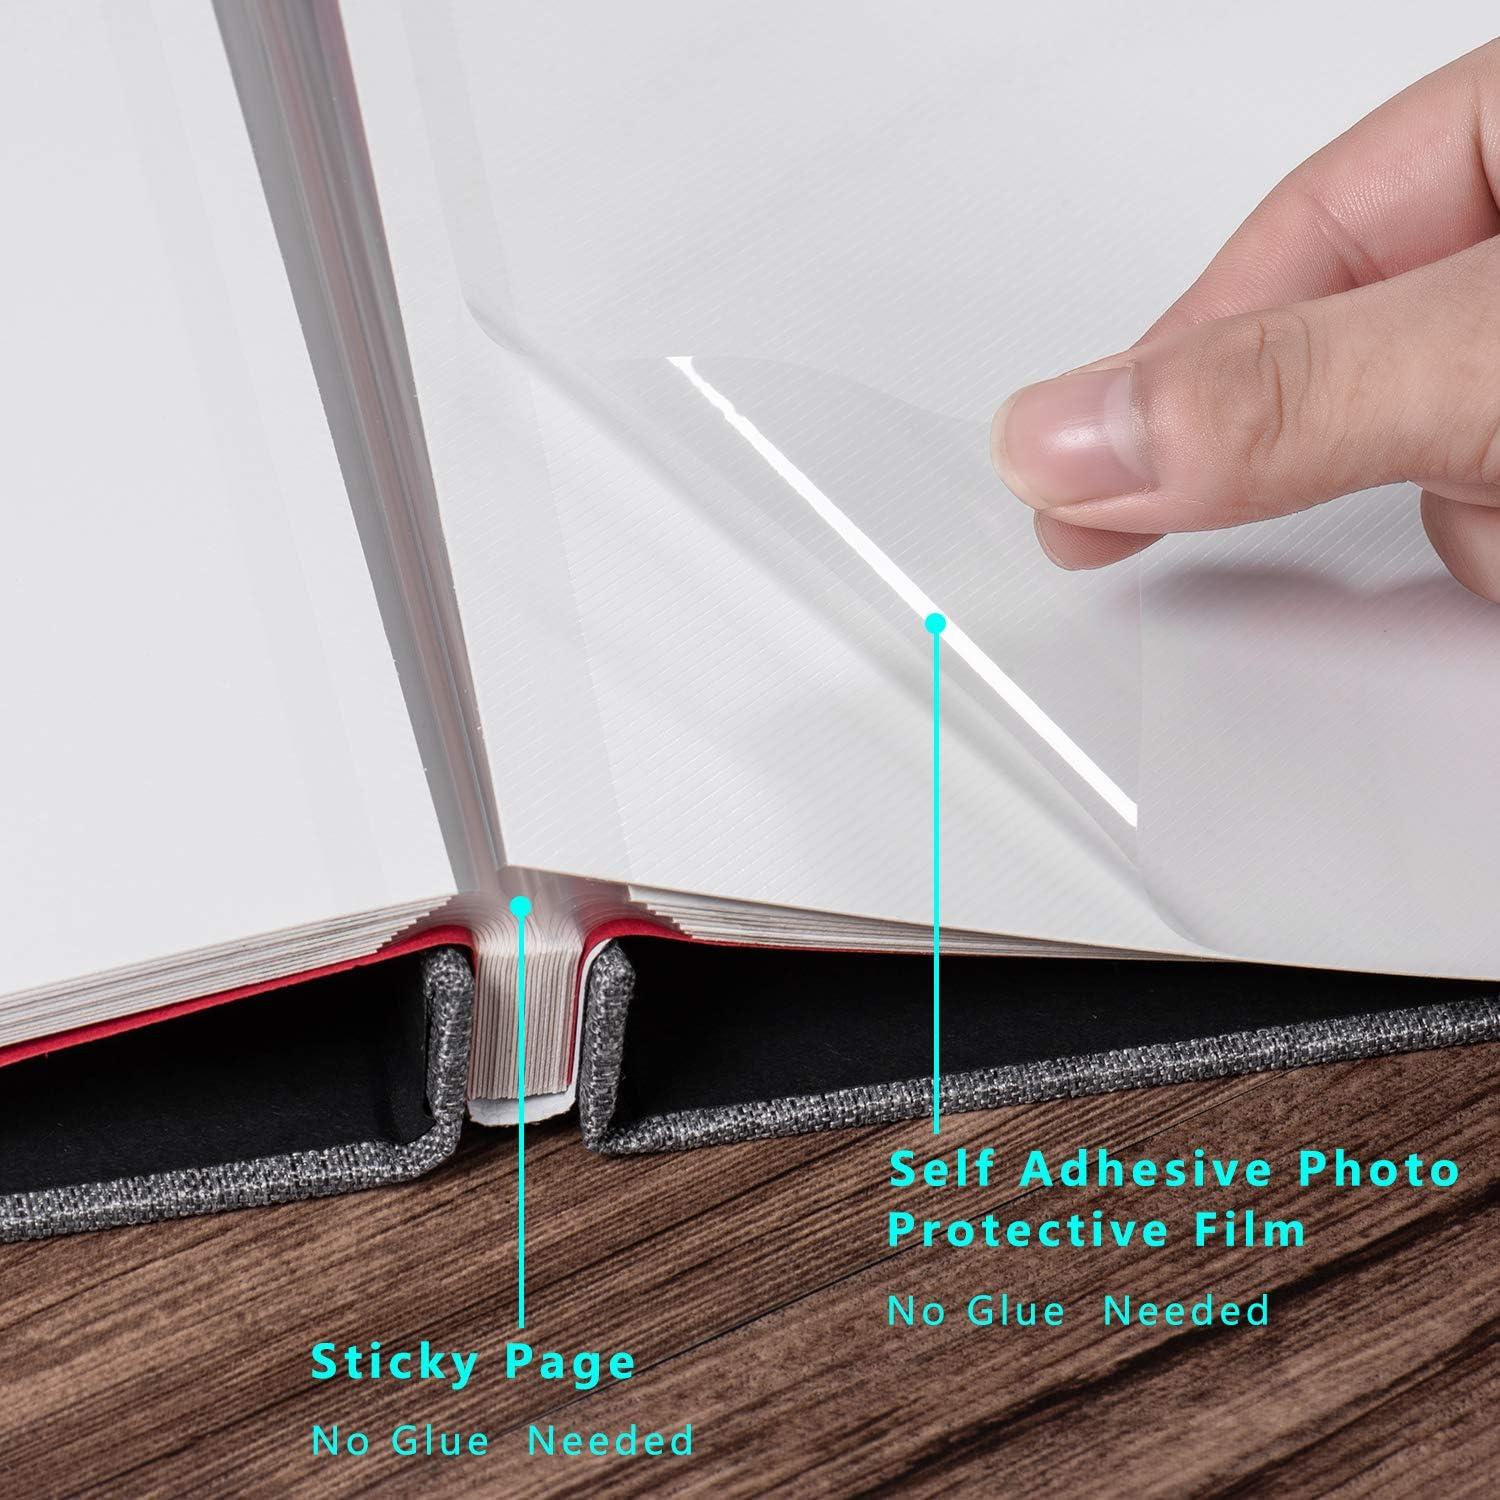  Photo Album Self Adhesive 3x5 4x6 5x7 6x8 8x10 8.5x11 11x10.6  Magnetic Scrapbook Length 11x10.6 Inch 40 Pages Linen Cover DIY Photo Album  with A Metallic Pen and DIY Accessories(Gray)